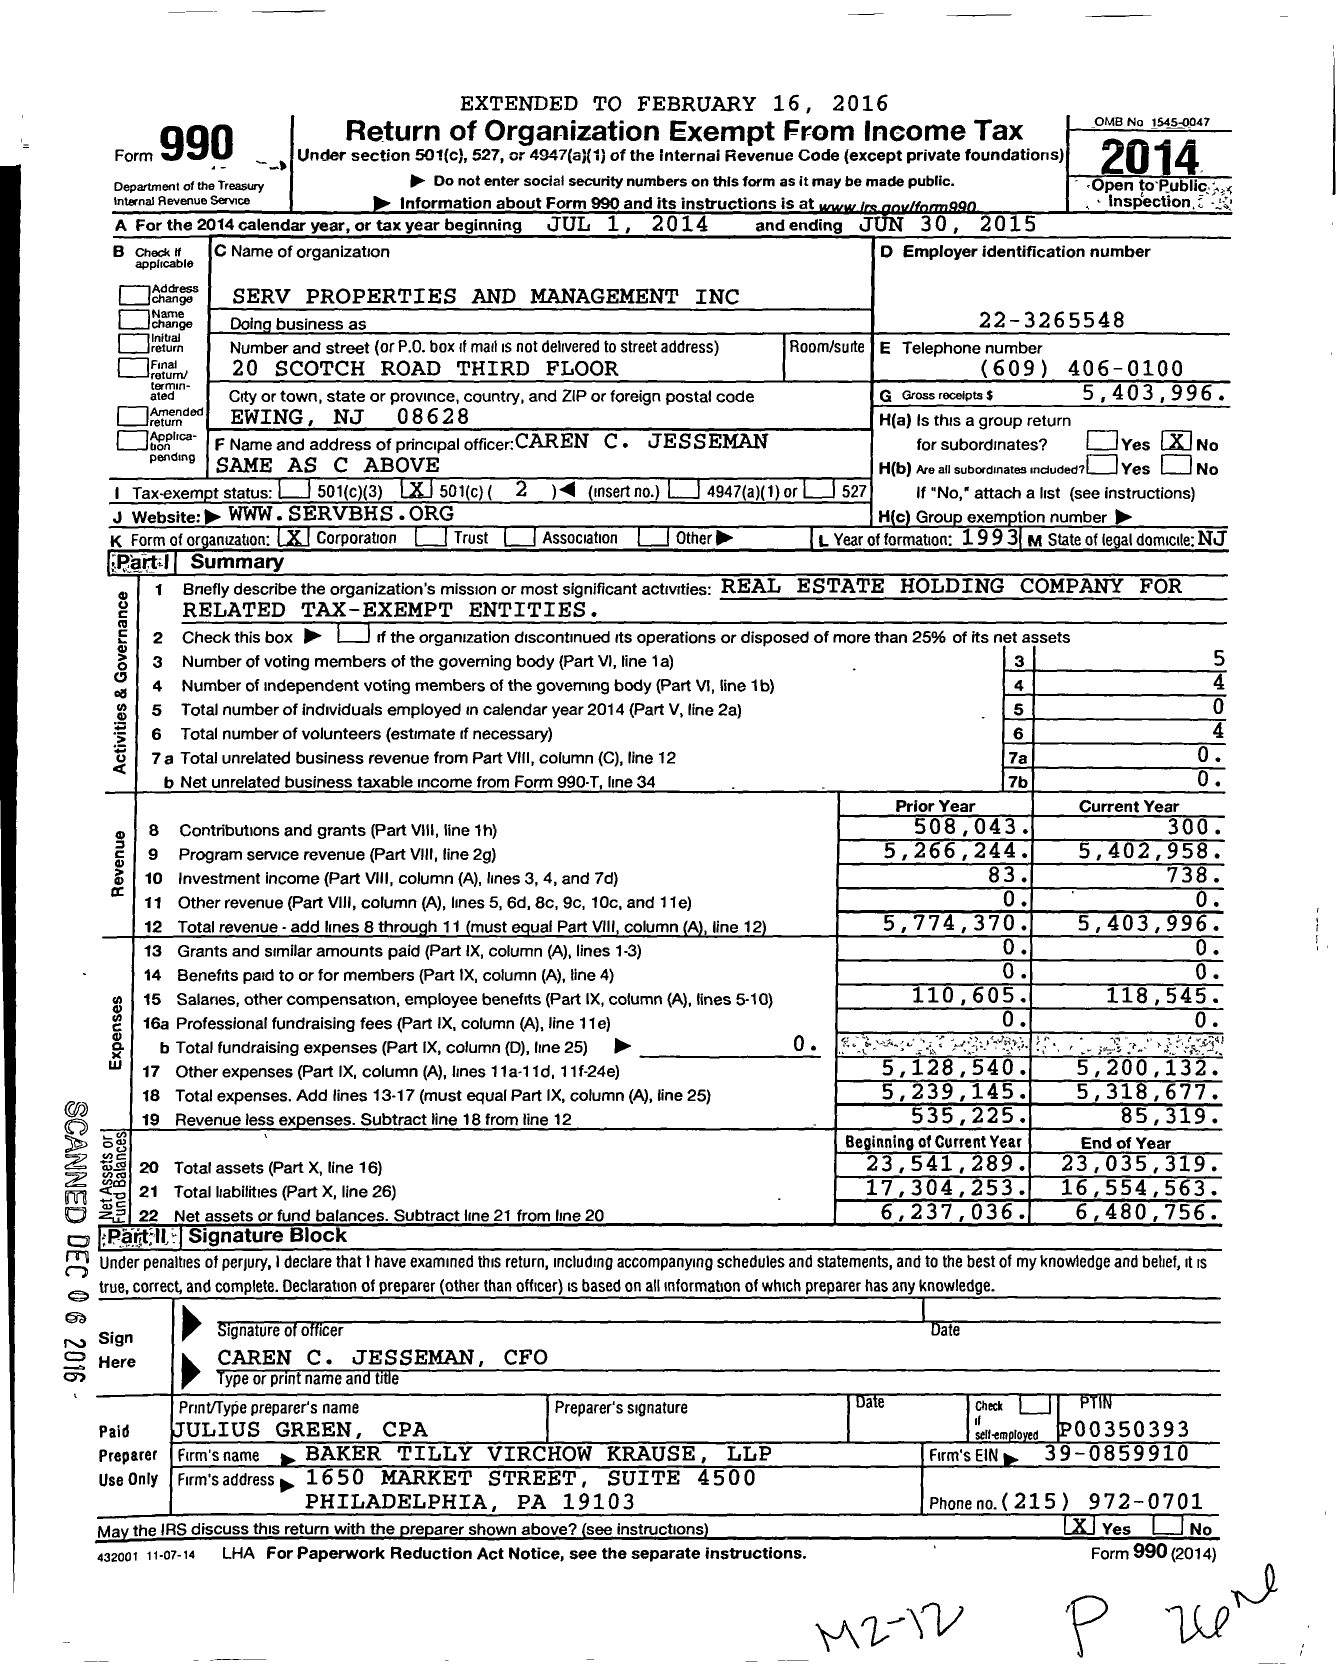 Image of first page of 2014 Form 990O for Serv Properties and Management